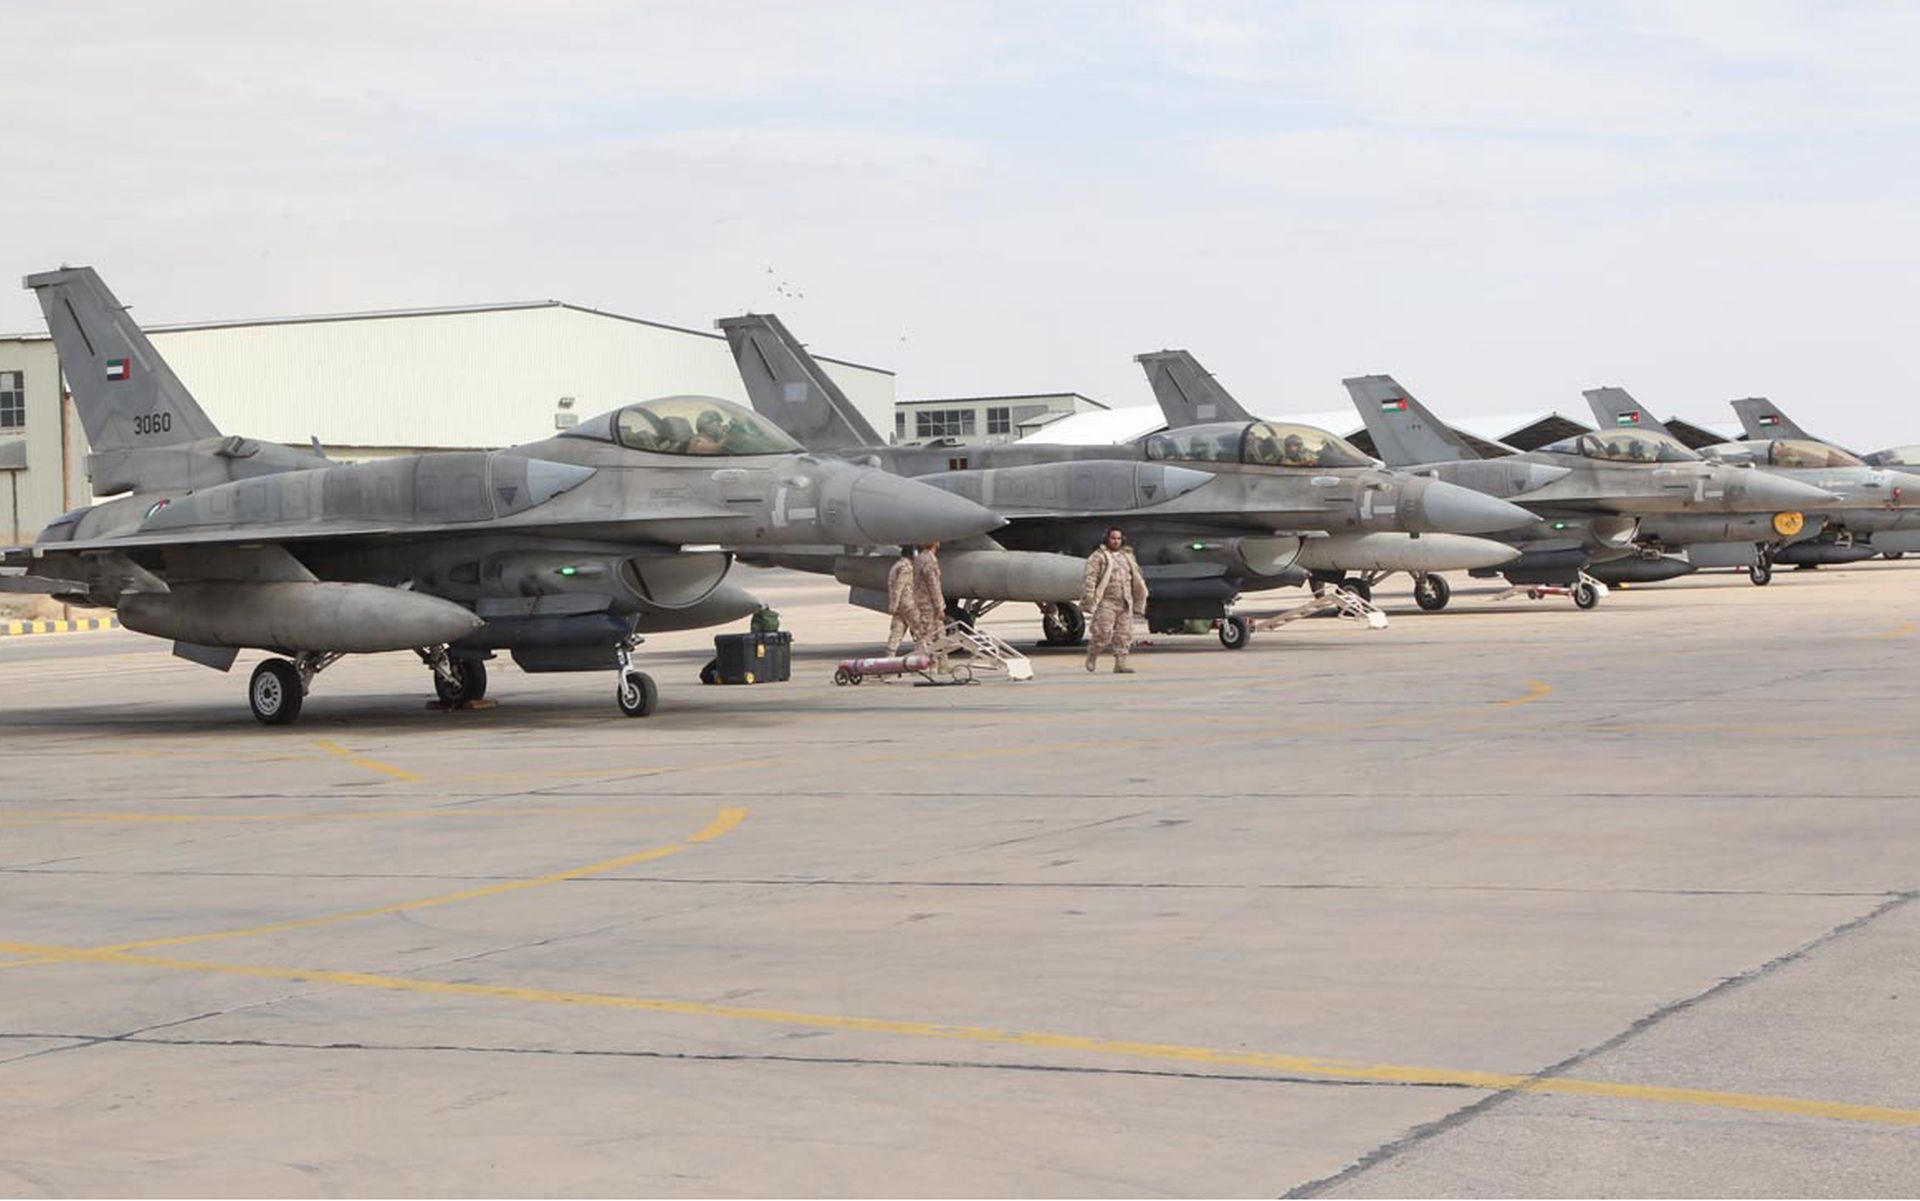 JORDAN:  This handout picture released by the official Jordanian news agency, PETRA on February 8, 2015, shows a squadron of United Arab Emirates (UAE) F-16 fighters stationed in one of Jordan's air bases to support it in strikes against the Islamic State group. The squadron of UAE F-16 fighter jets, which also includes C-17 troop and supply carriers and refuelling planes, which arrived to help the kingdom in its fight against the Islamic State which burned alive one of its pilots. UAE squadron chief Saeed Hassan told Petra the team "stands ready to carry out any mission in coordination with the Jordanian armed forces." (Photo by PETRA via Getty Images)